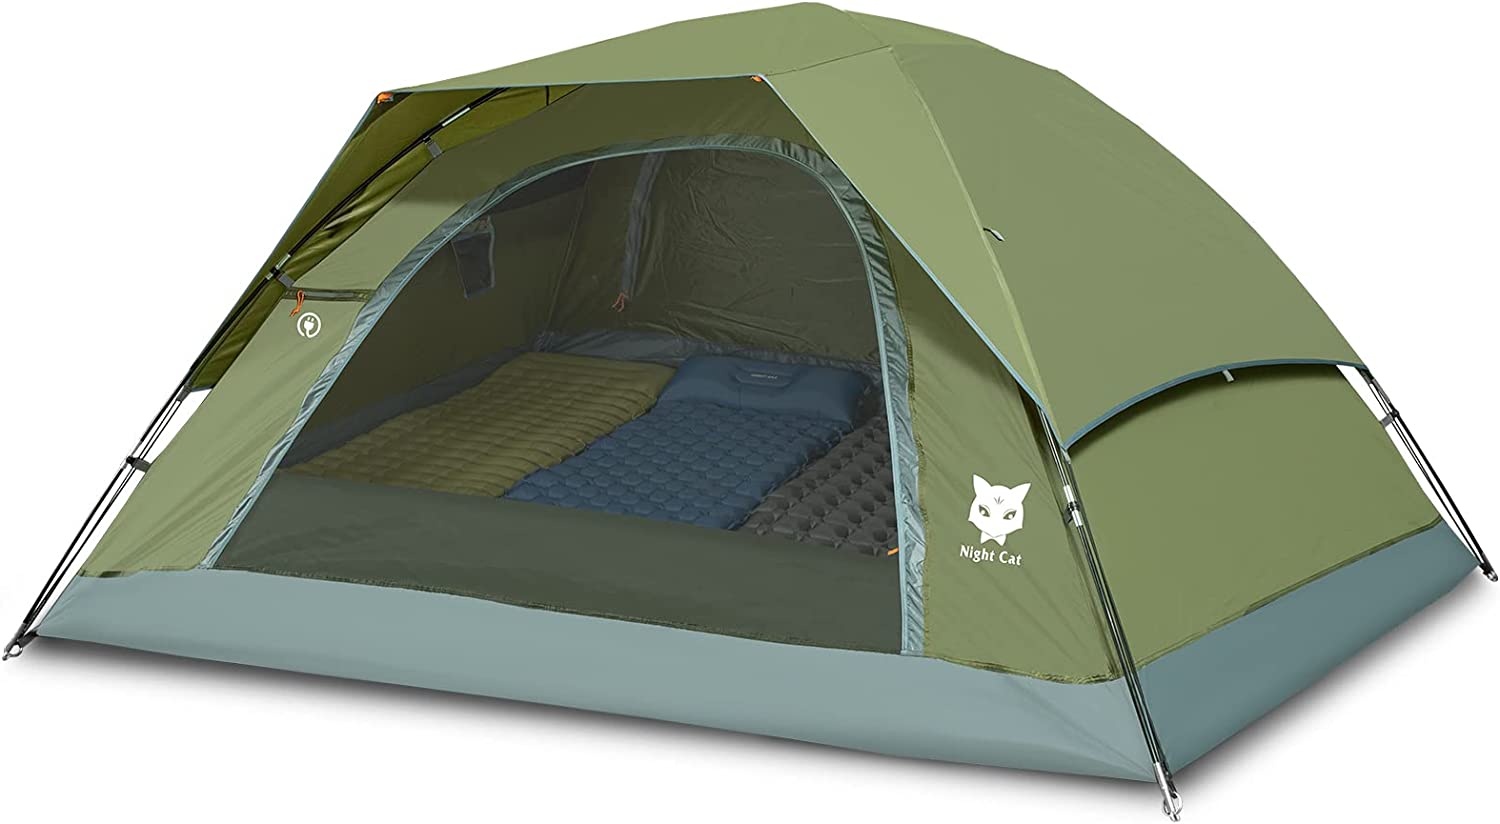 Night Cat Family Camping Tents 3 4 Persons with Unique Rainfly Waterproof Backpacking Tent Double Layers 2 Doors Easy Clip Setup